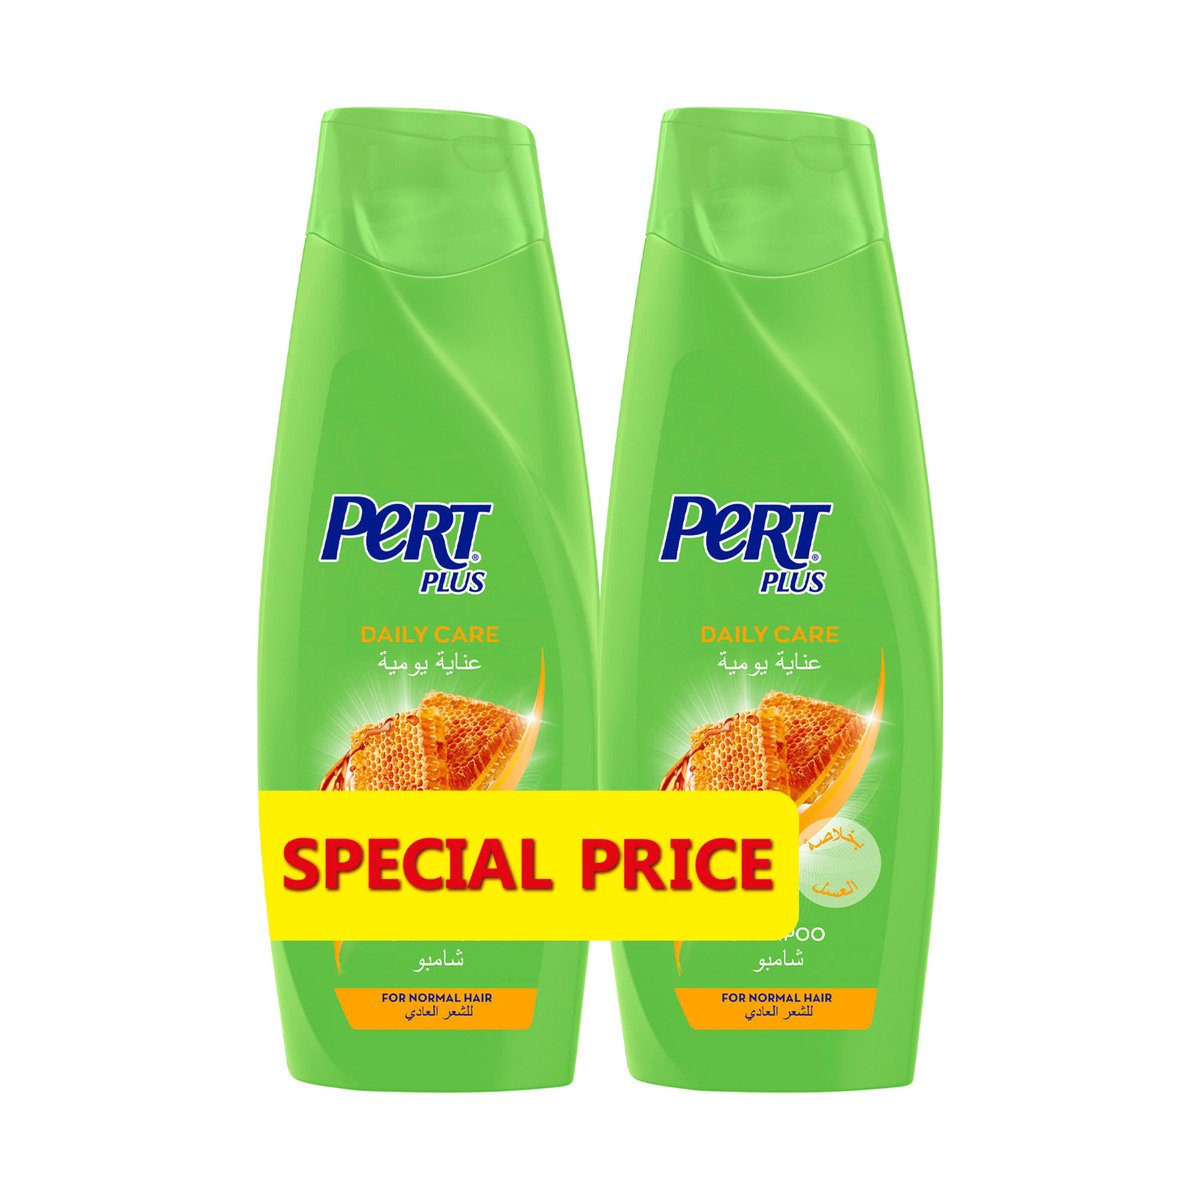 Pert Plus Daily Care Shampoo with Honey Extract 2 x 400 ml